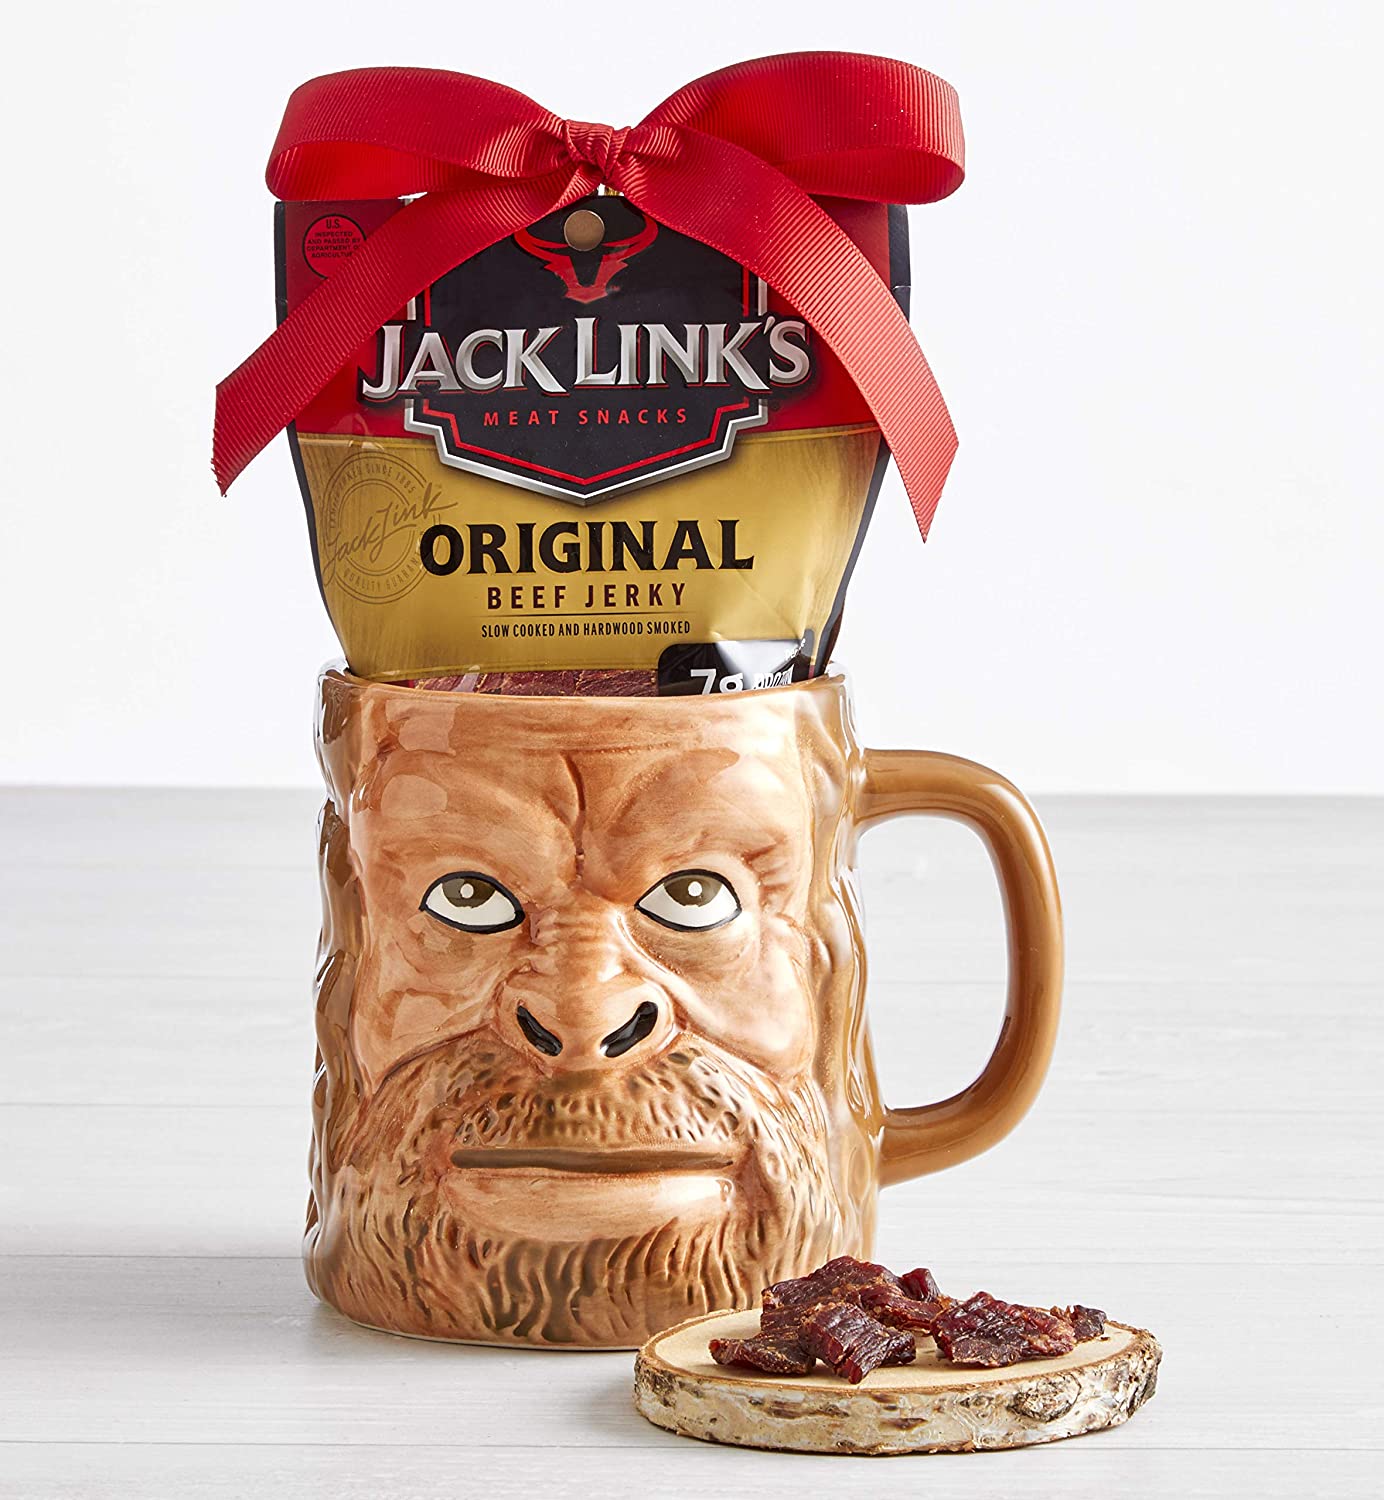 https://odditymall.com/includes/content/upload/jack-links-sasquatch-face-mug-with-beef-jerky-gift-set-2341.jpg